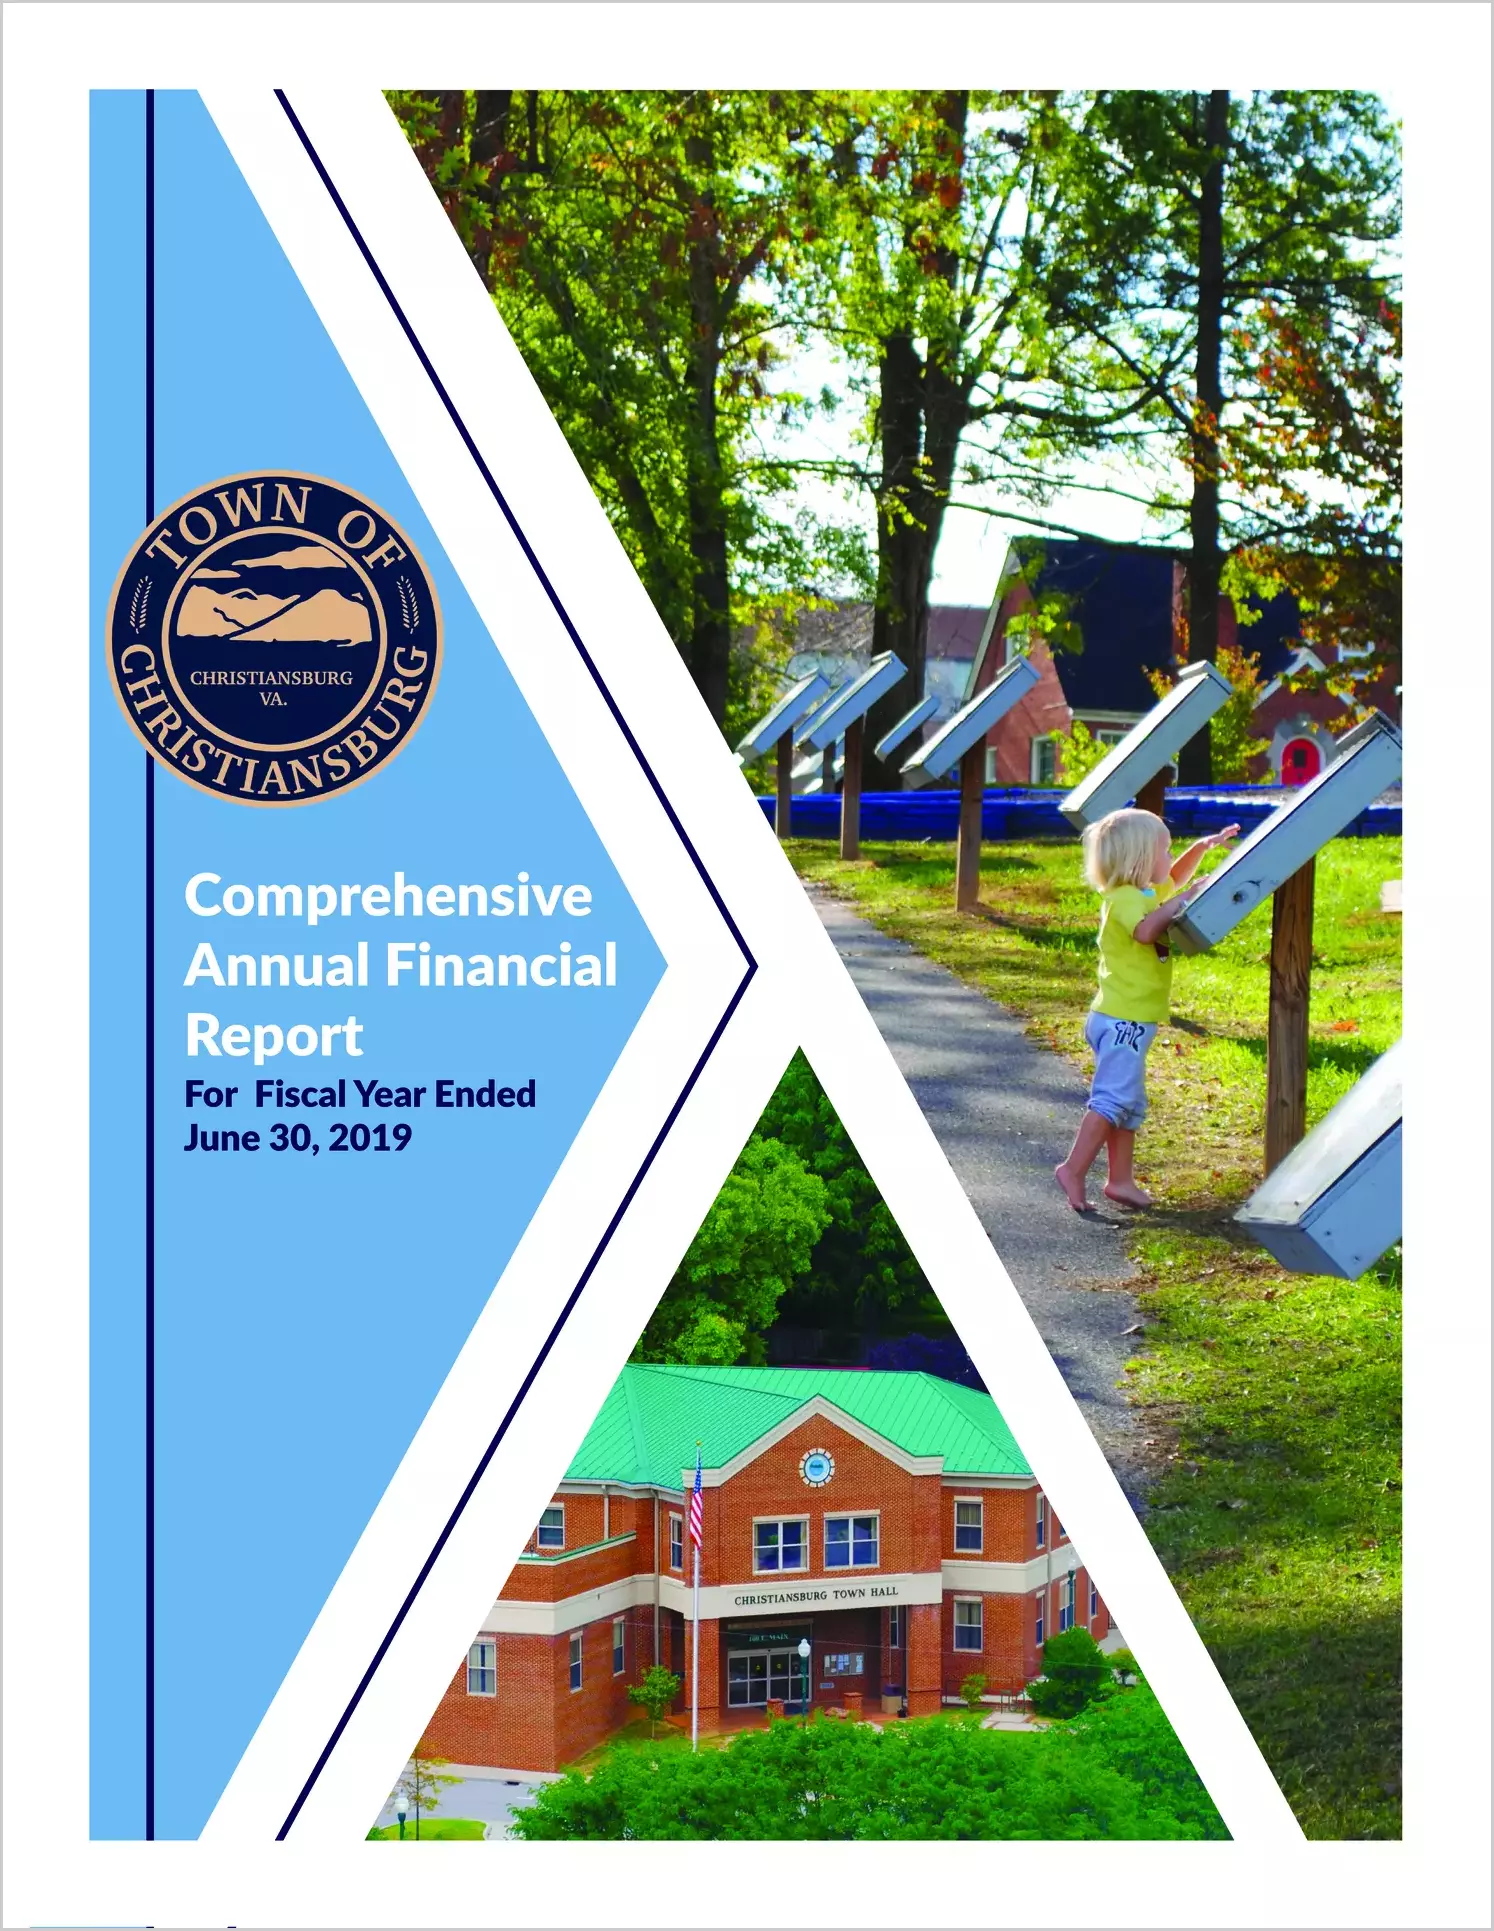 2019 Annual Financial Report for Town of Christiansburg